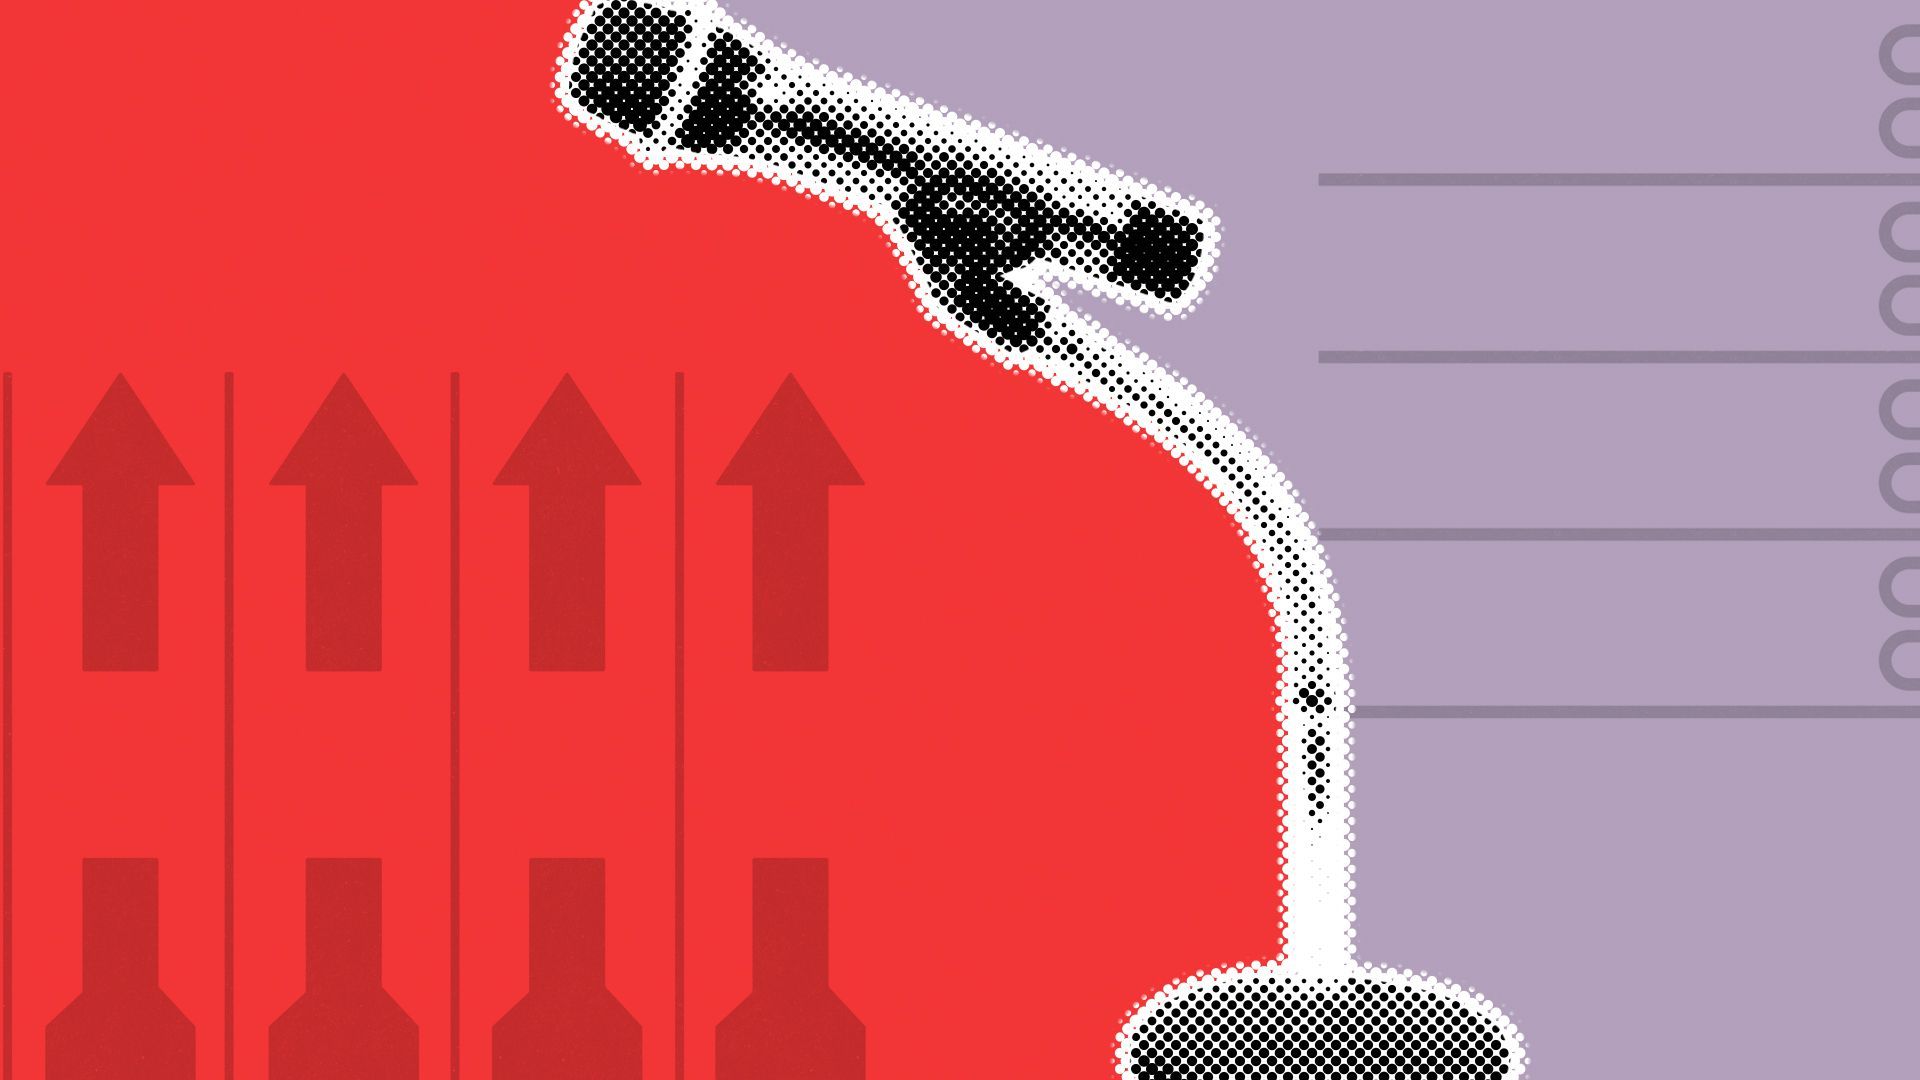 Illustration of a microphone surrounded by election form icons.